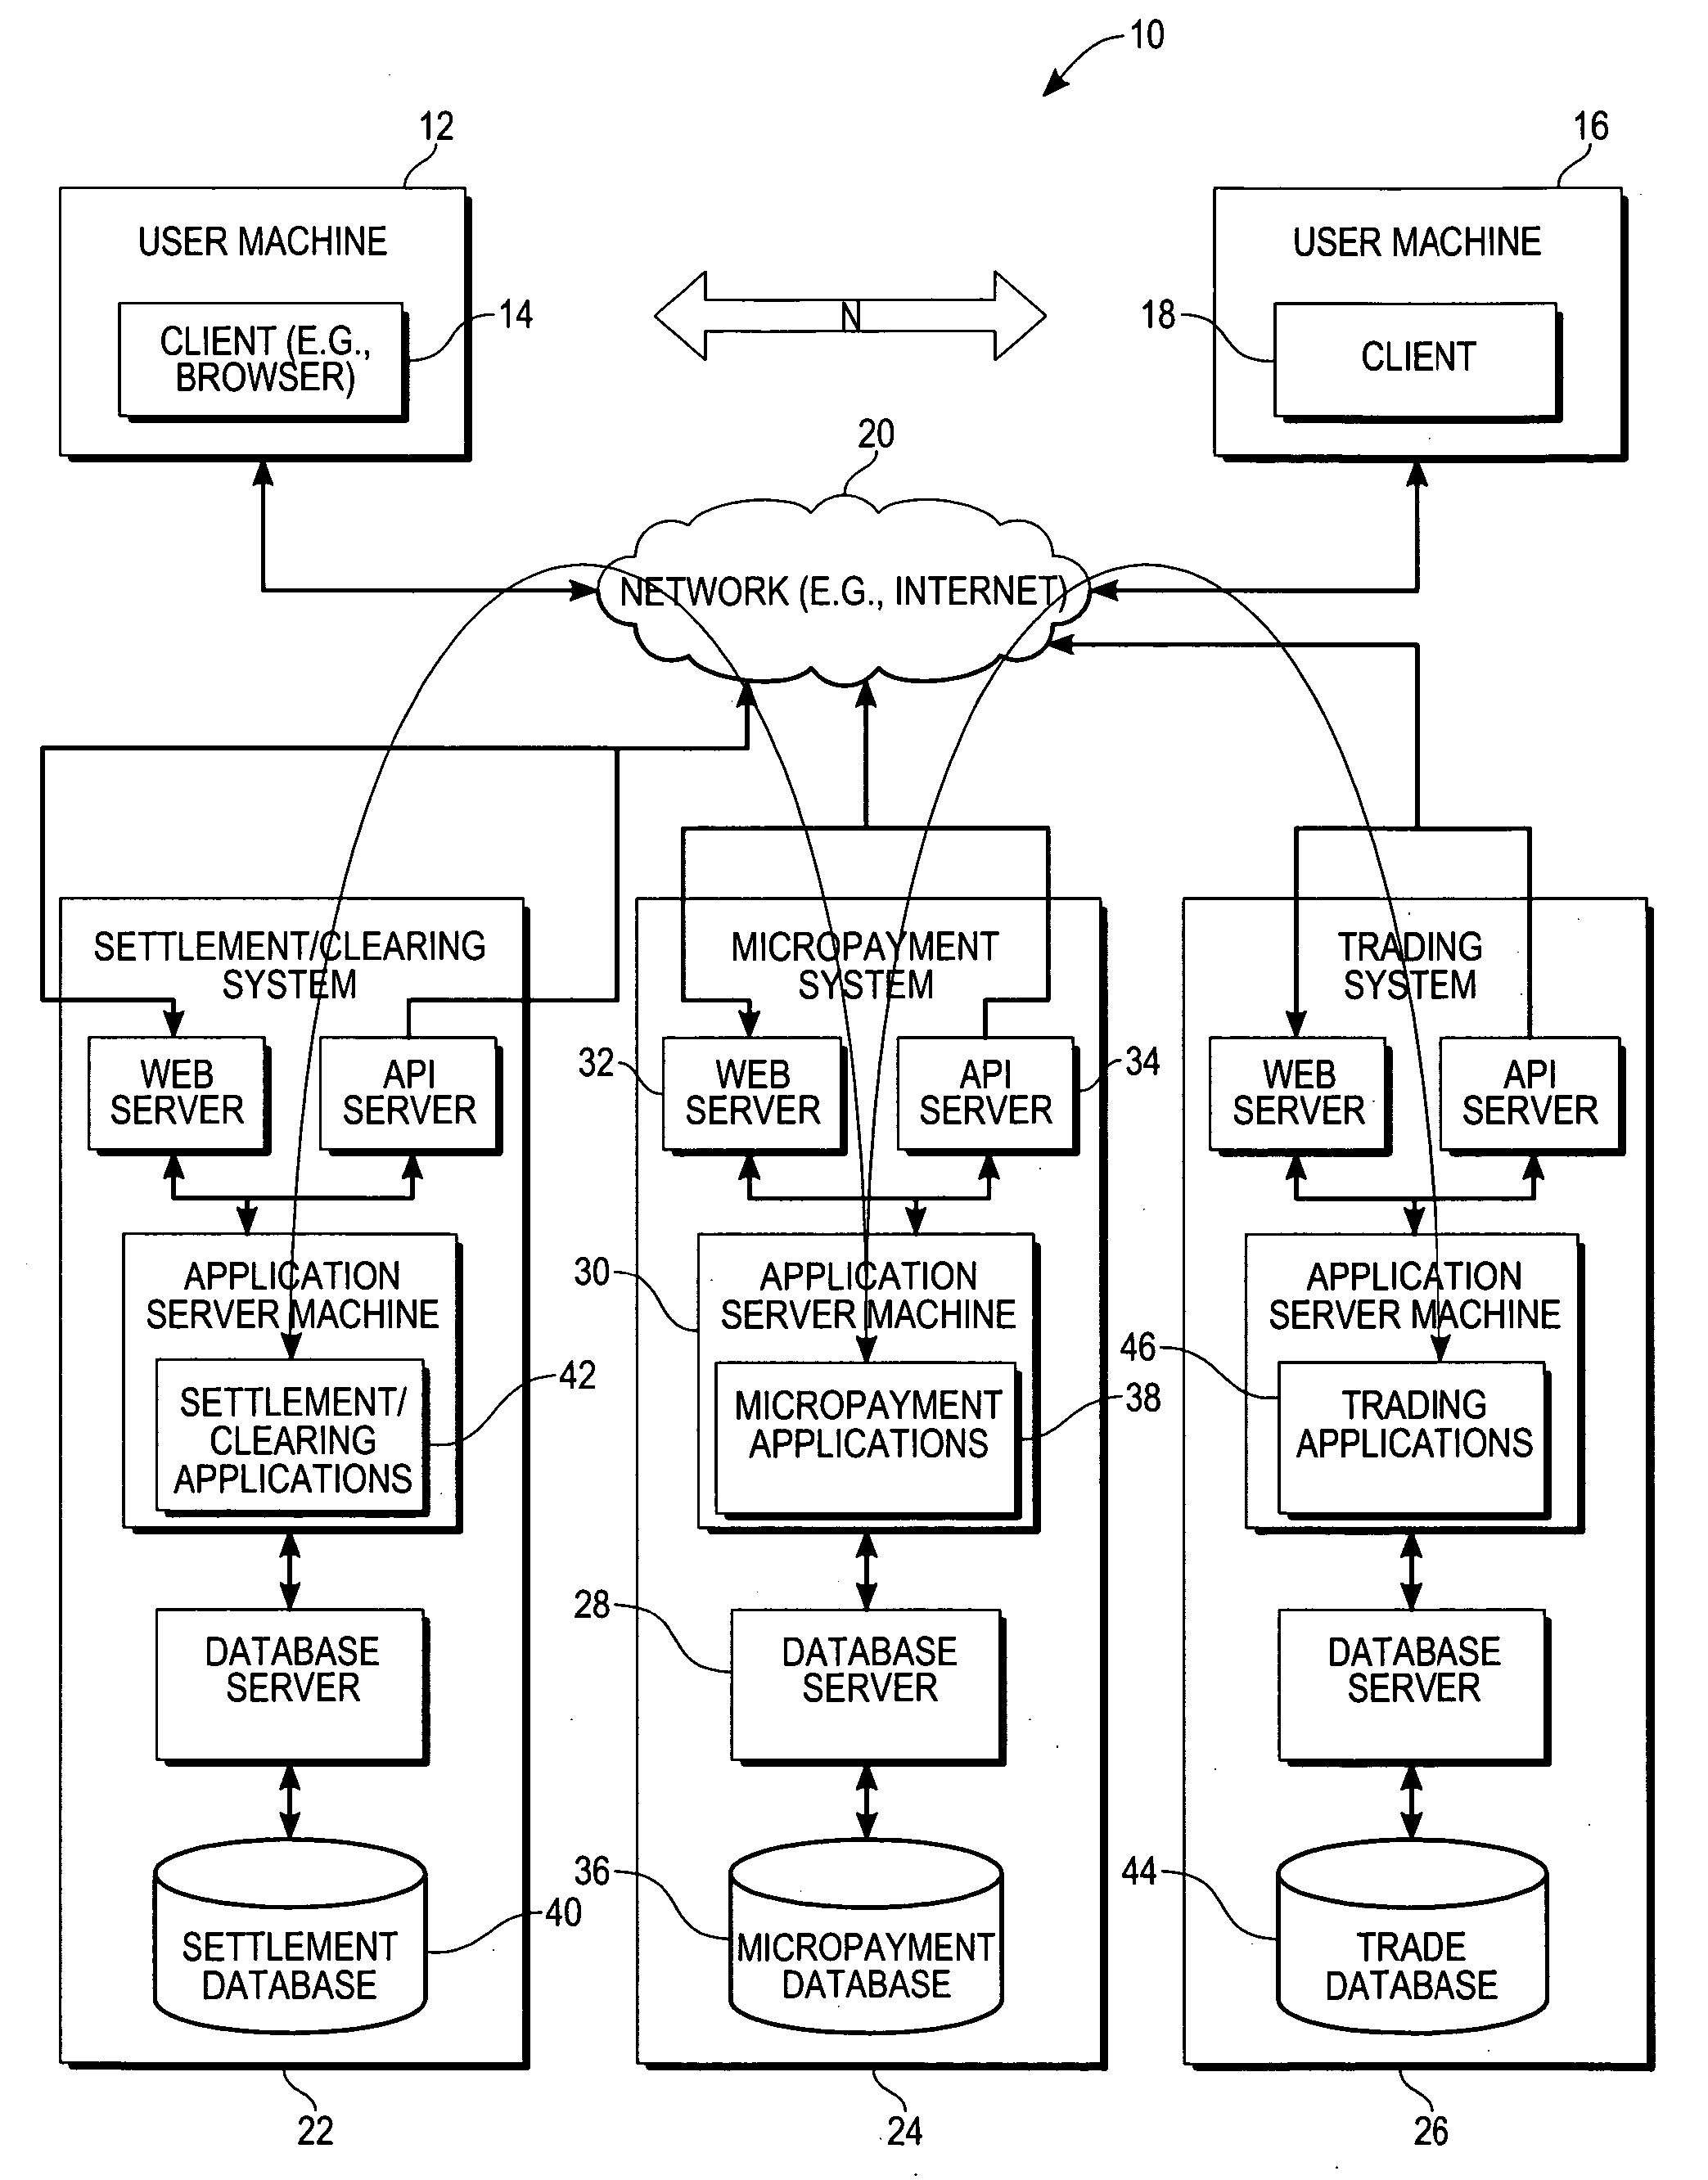 Method and system to facilitate a payment in satisfaction of accumulated micropayment commitments to a vendor